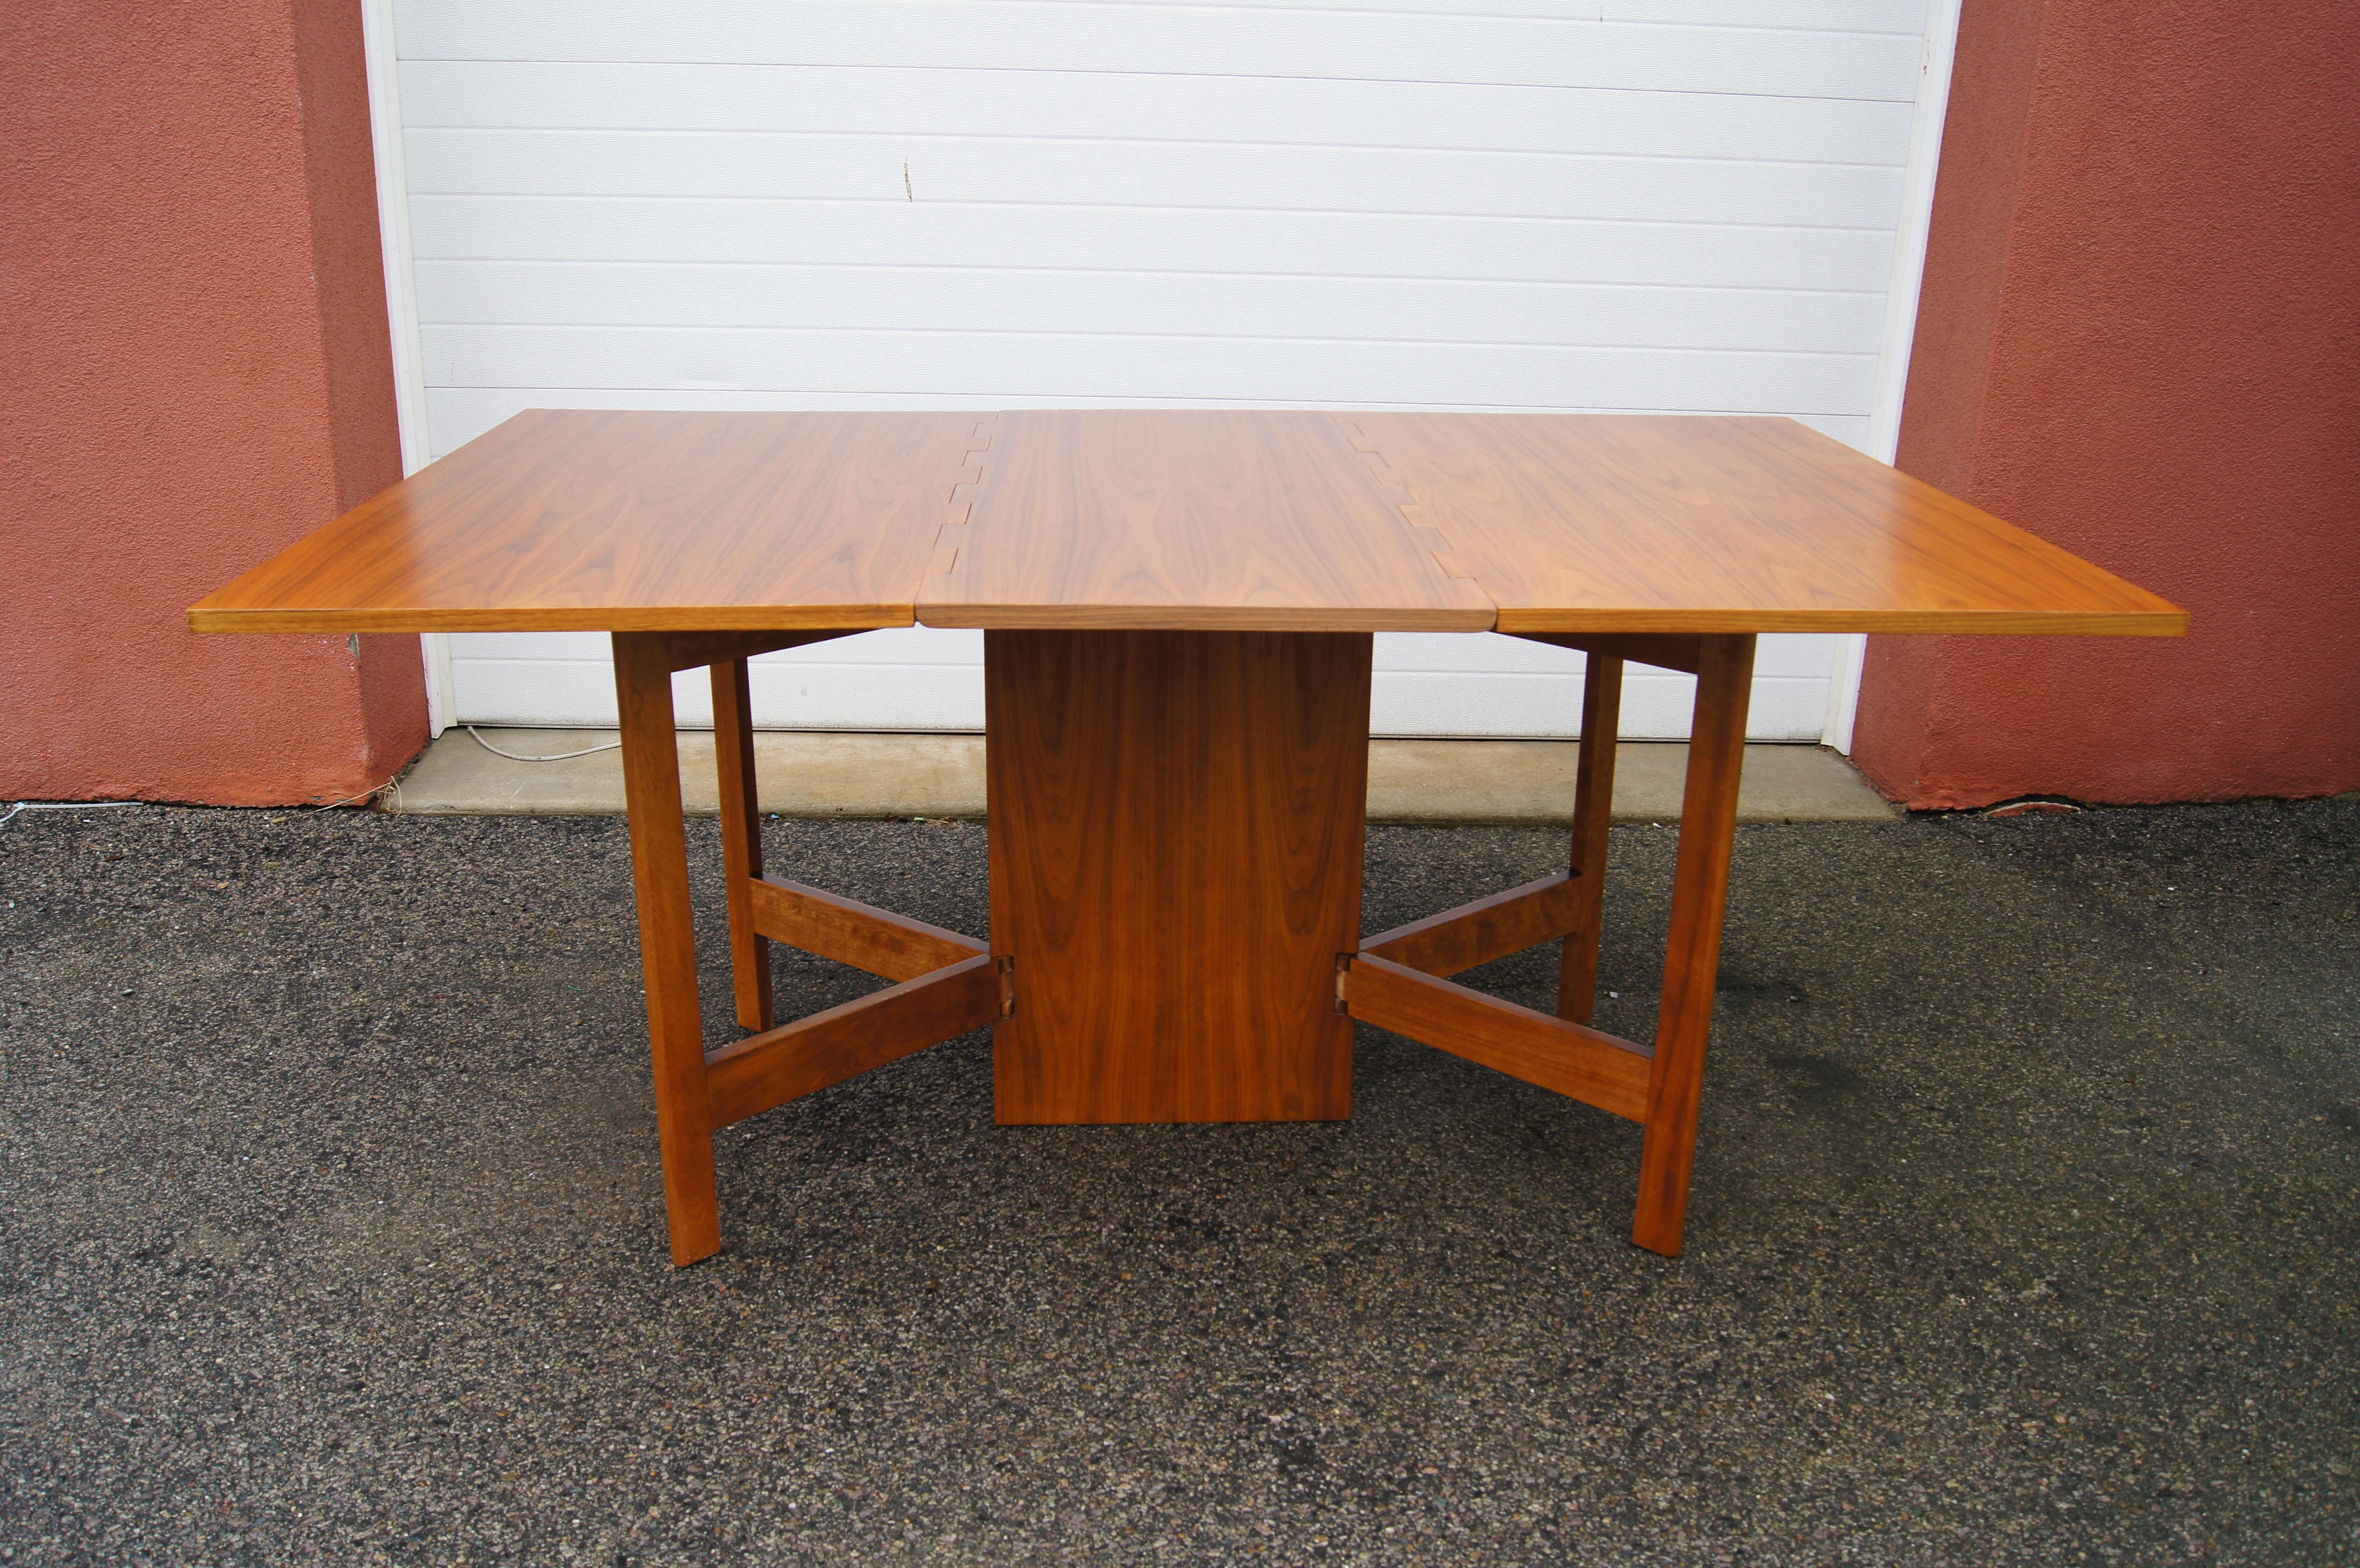 Mid-20th Century Walnut Gate Leg Dining Table, Model 4656, by George Nelson for Herman Miller